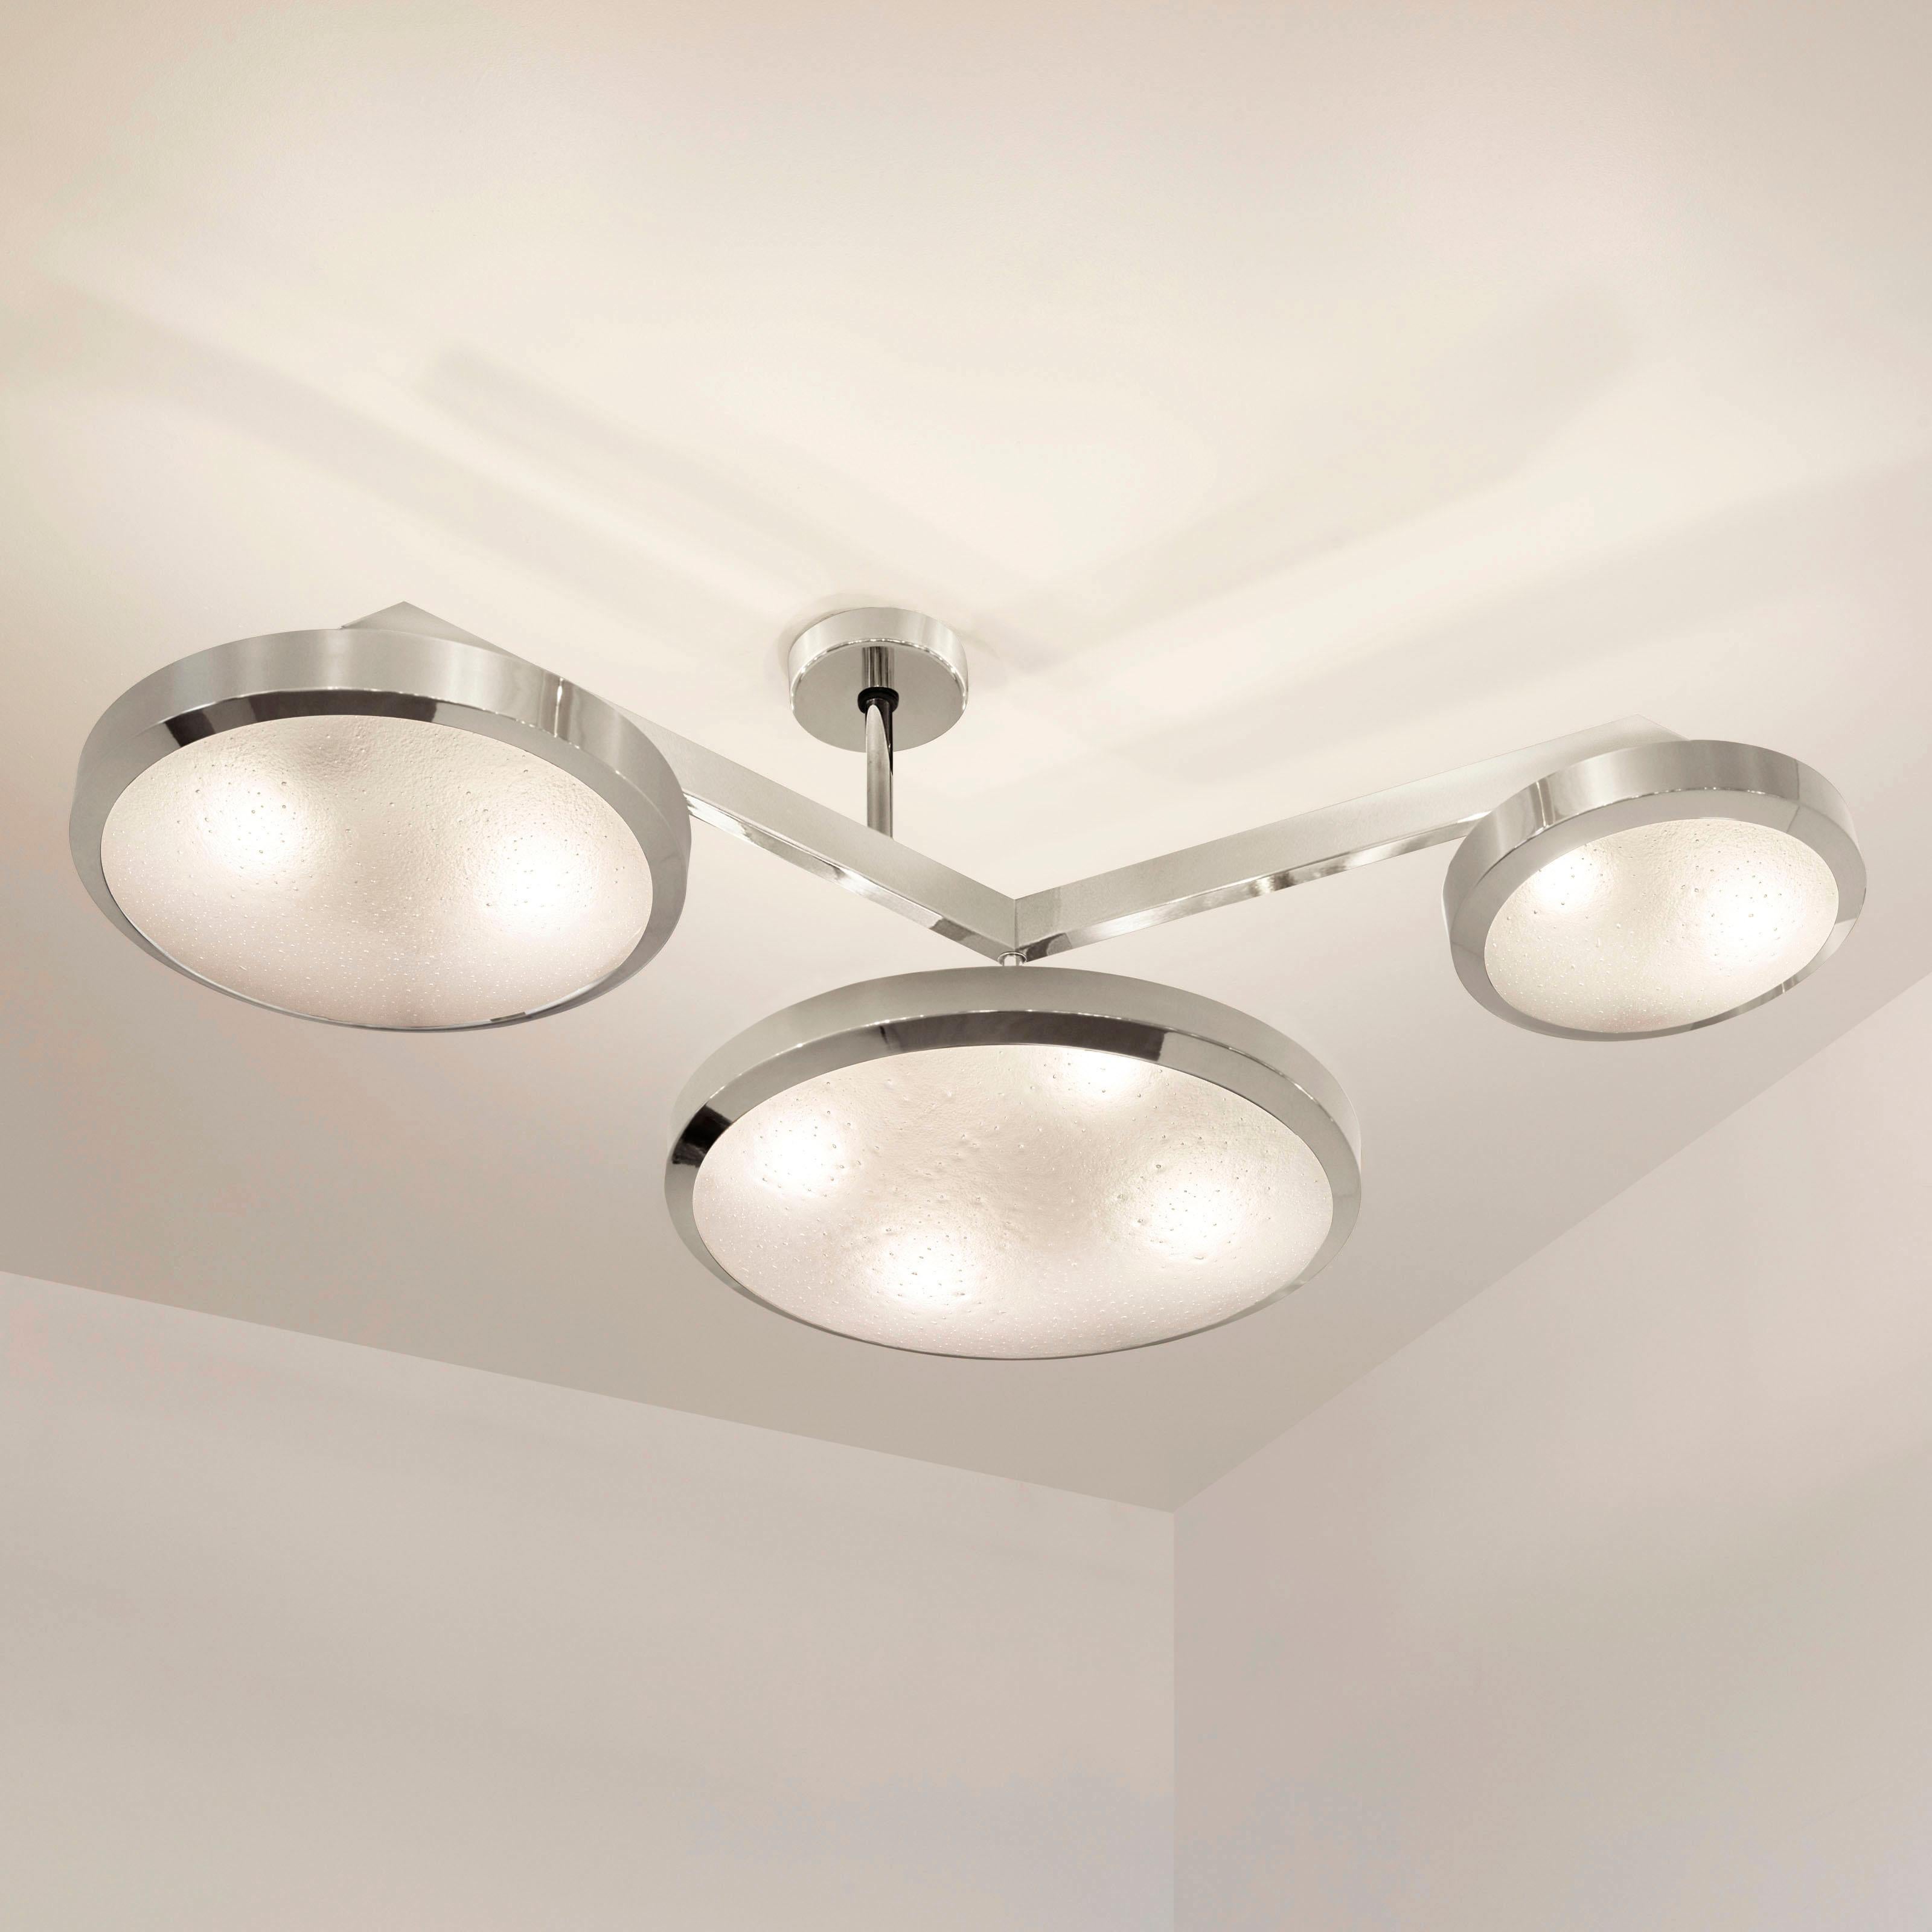 Modern Zeta Ceiling Light by Gaspare Asaro - Polished Nickel Finish For Sale